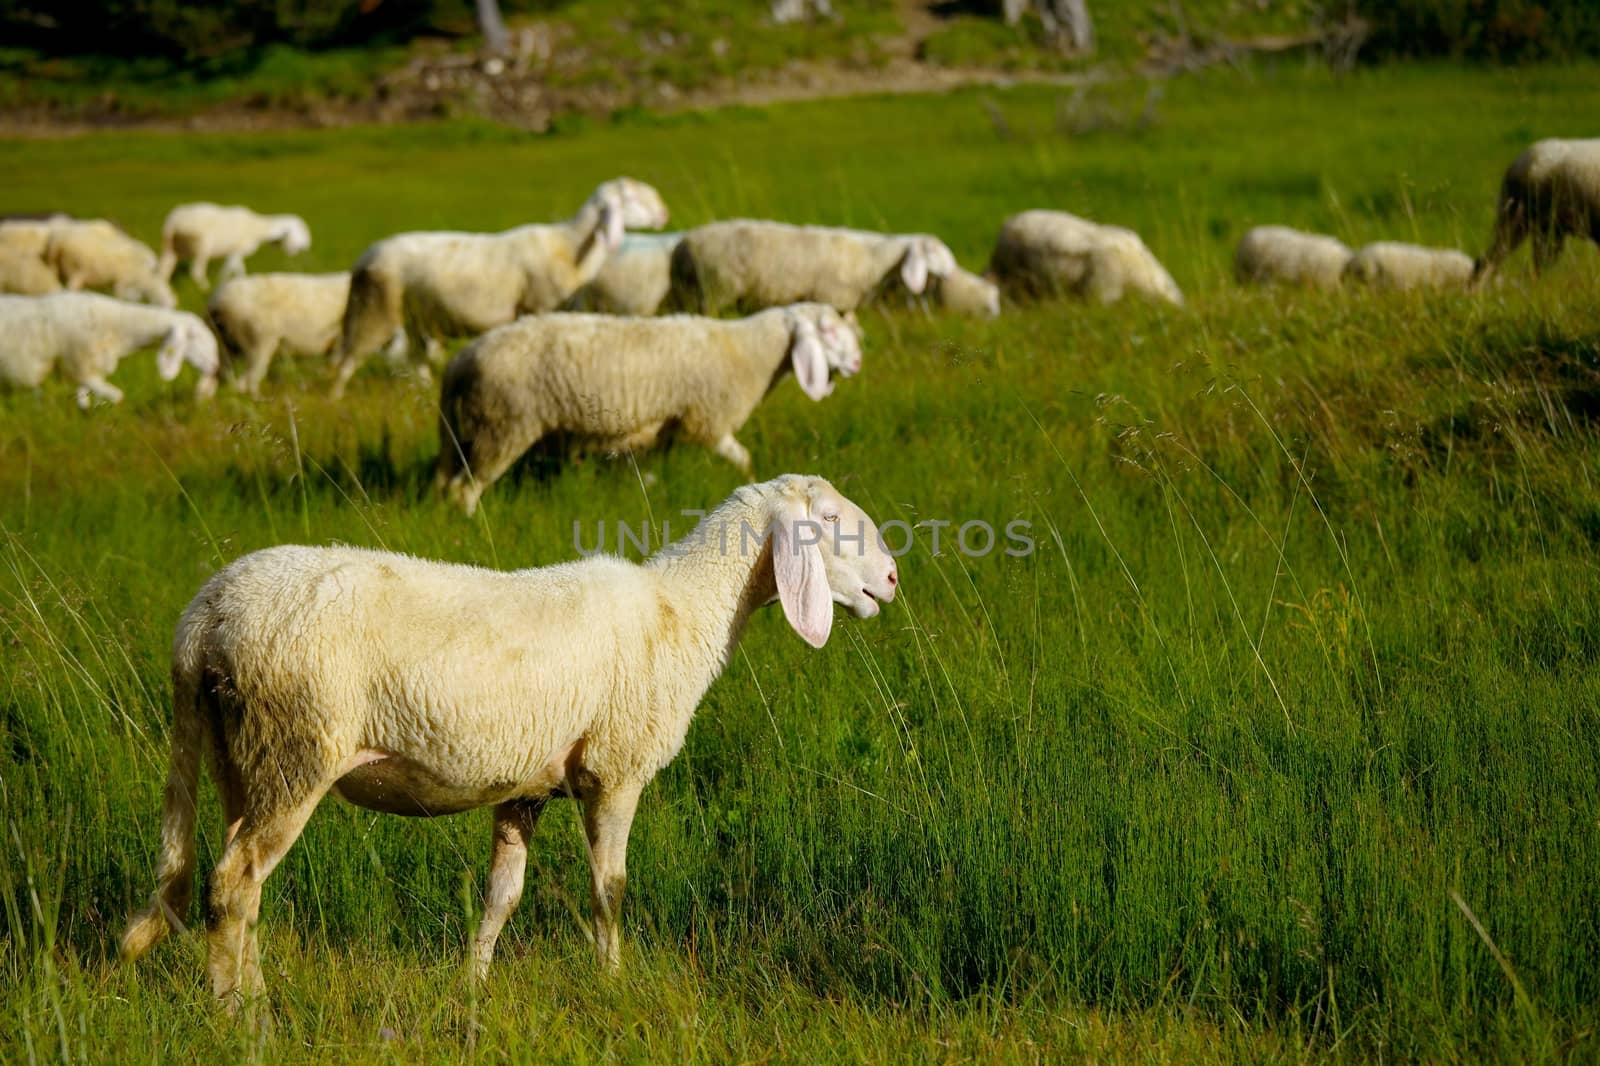 Sheep in the grass by Gudella